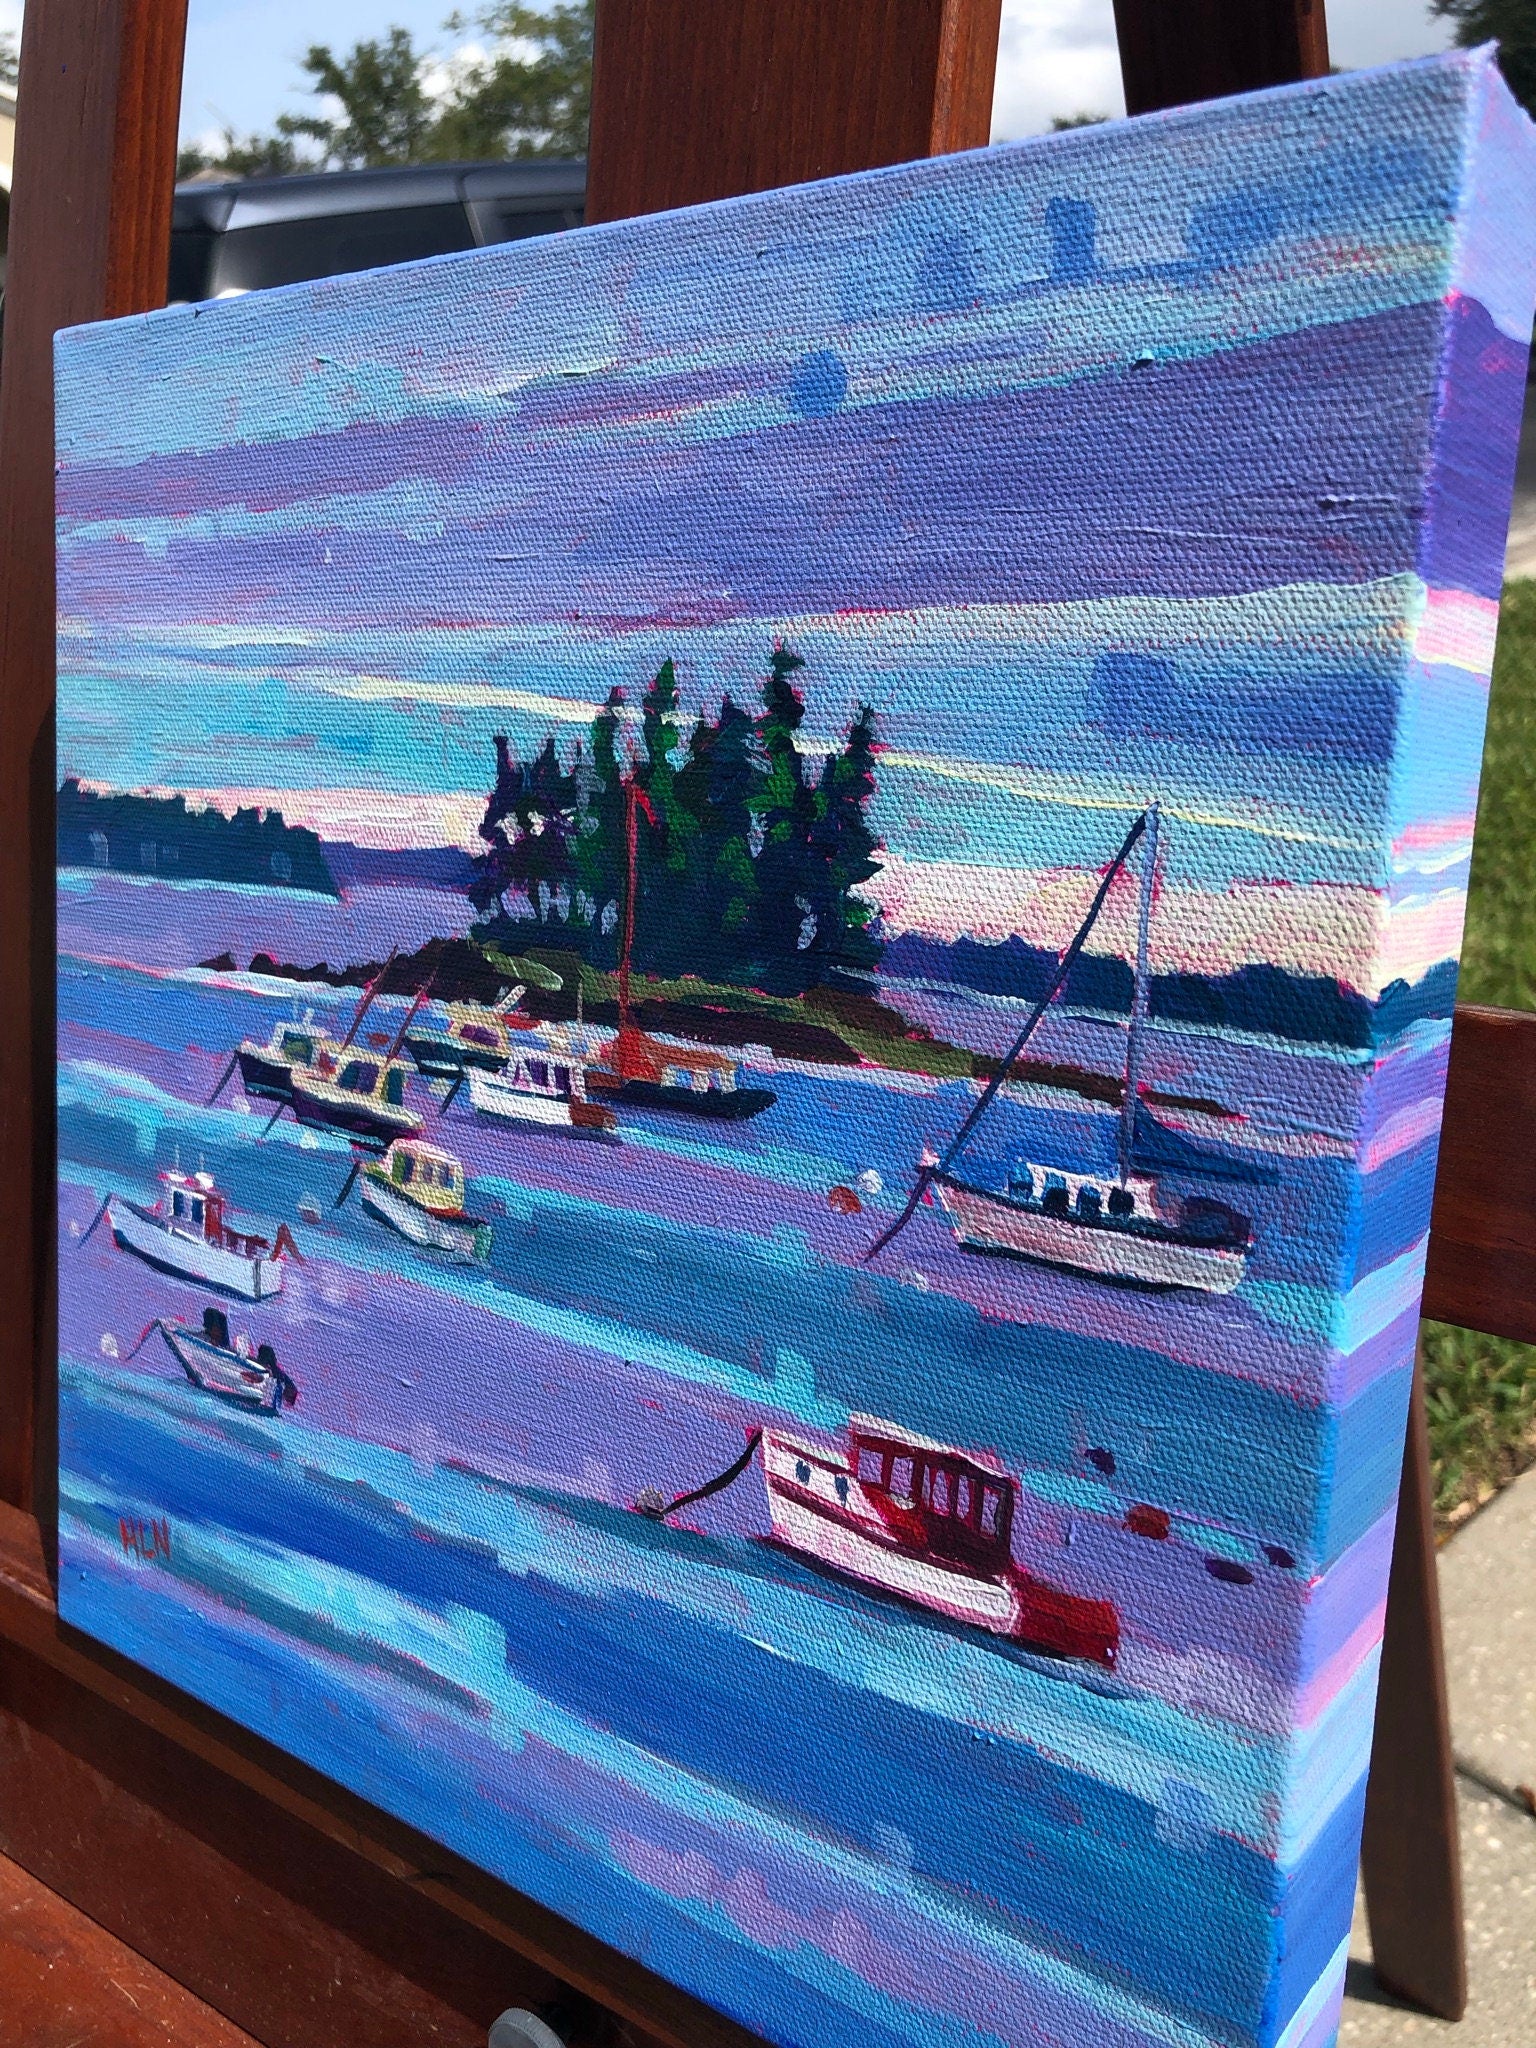 alternative view of lobster boats painting shows painting wraps around edge of canvas